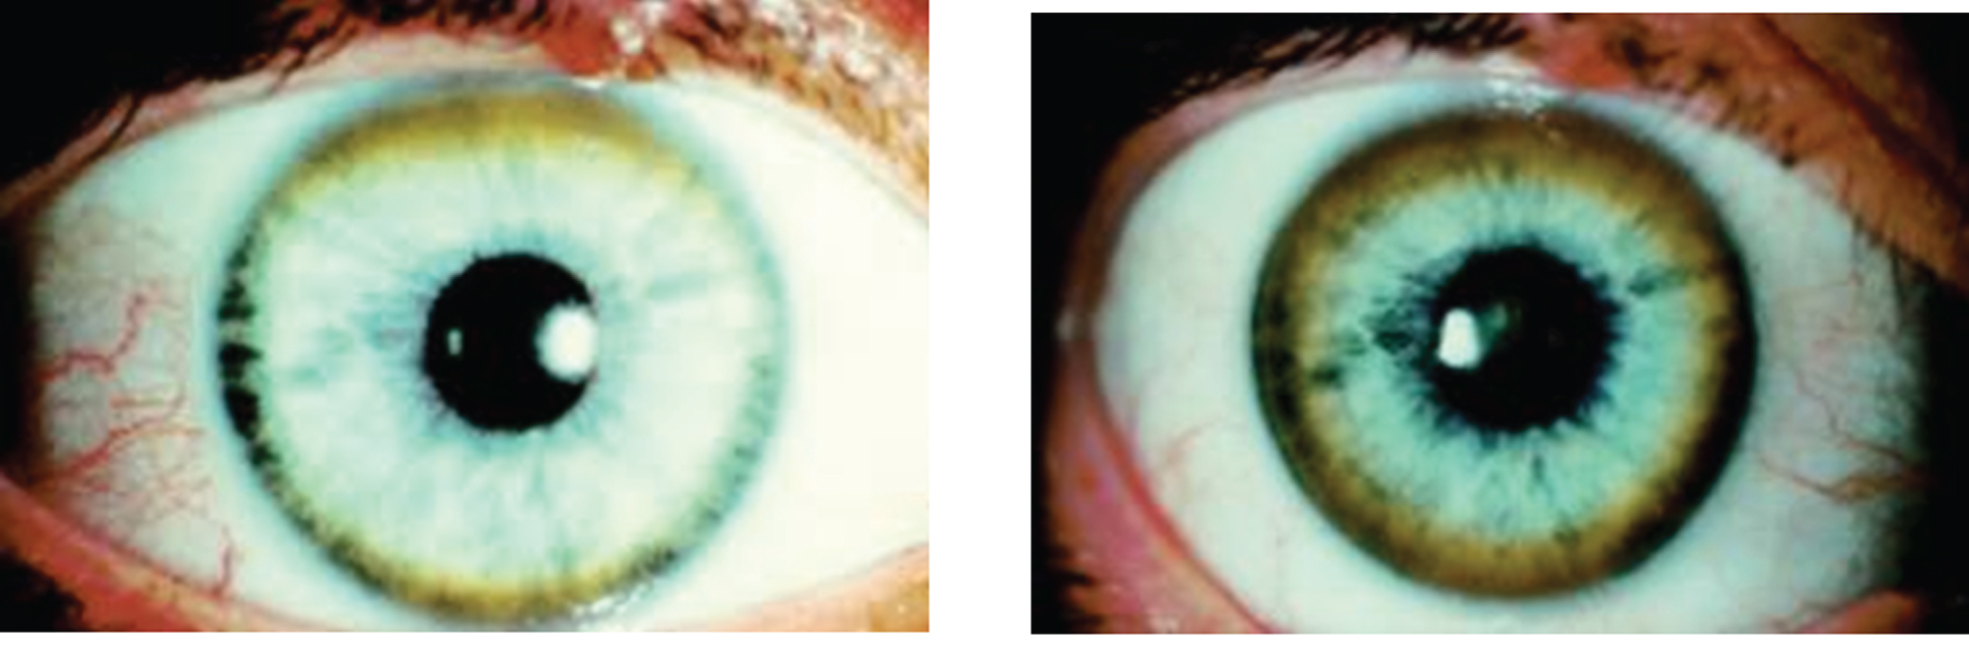 Appearance of Kayser-Fleischer ring in Wilson disease. Dark pigment at periphery of the cornea is due to deposition of copper.